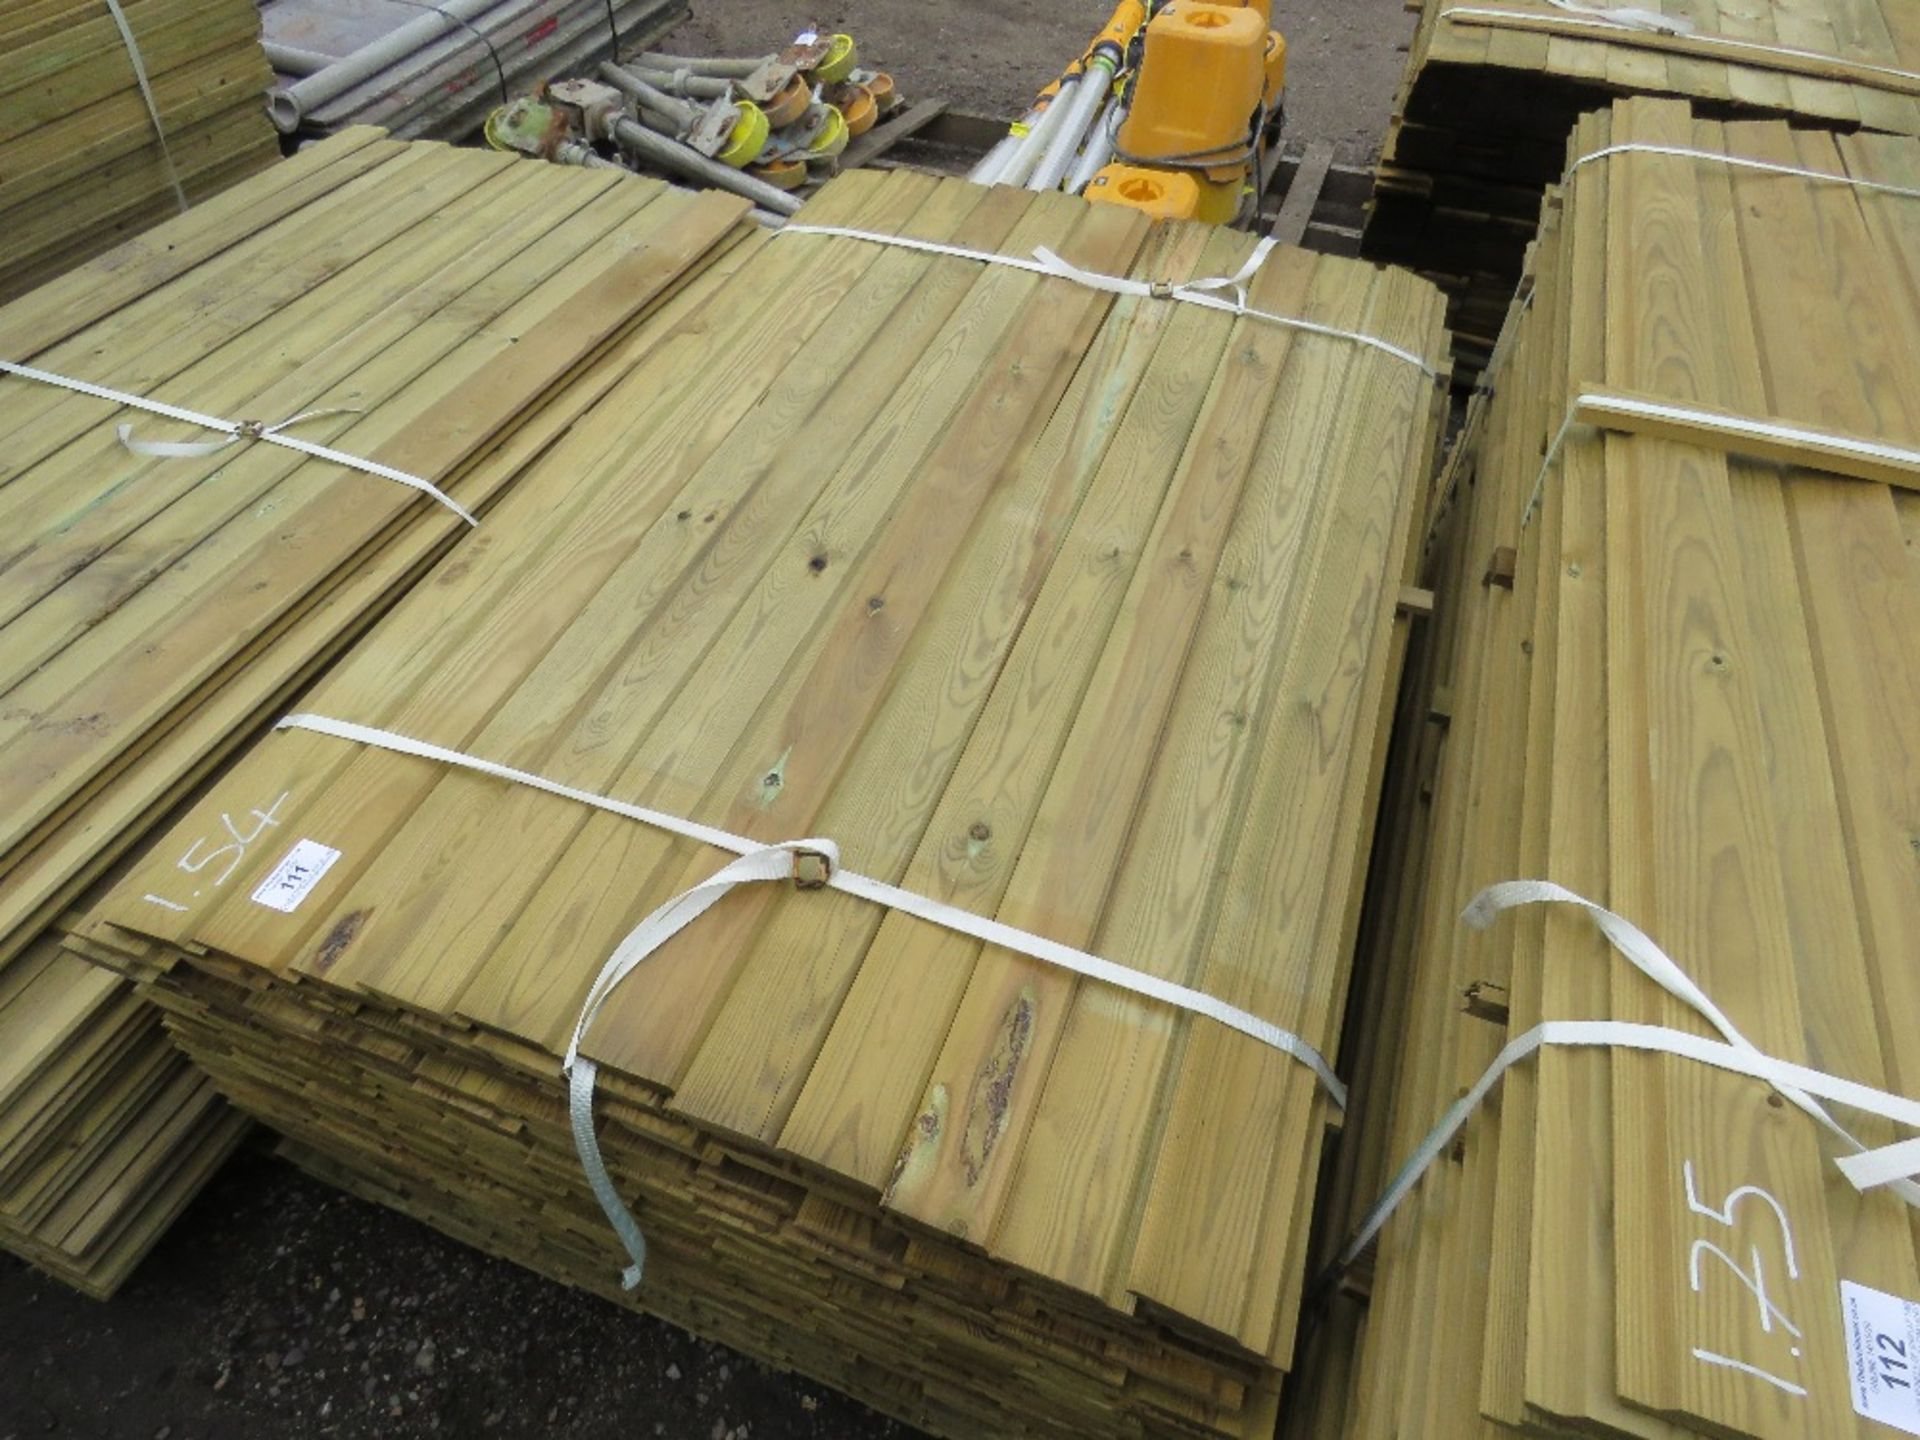 LARGE BUNDLE OF SHIPLAP TIMBER FENCE CLADDING @1.54M LENGTH X 10CM WIDE APPROX.